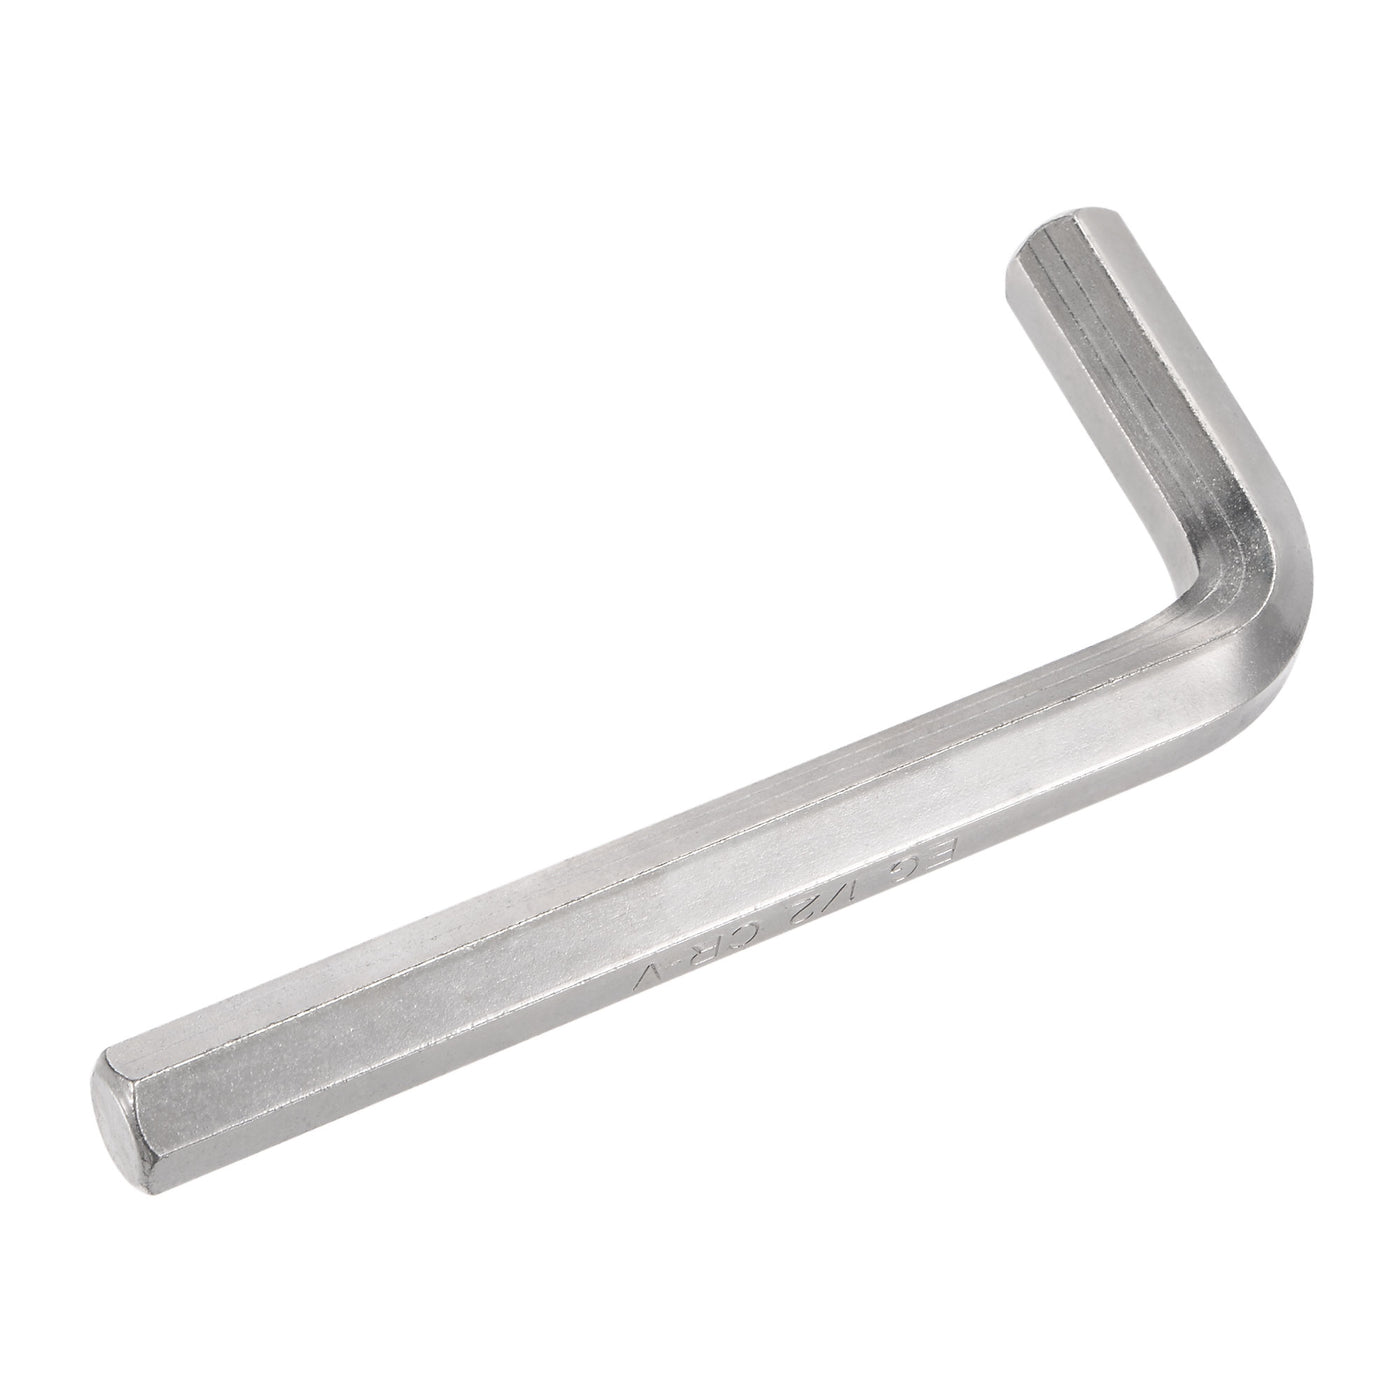 uxcell Uxcell Hex Key Wrench, L Shaped Long Arm CR-V Repairing Tool